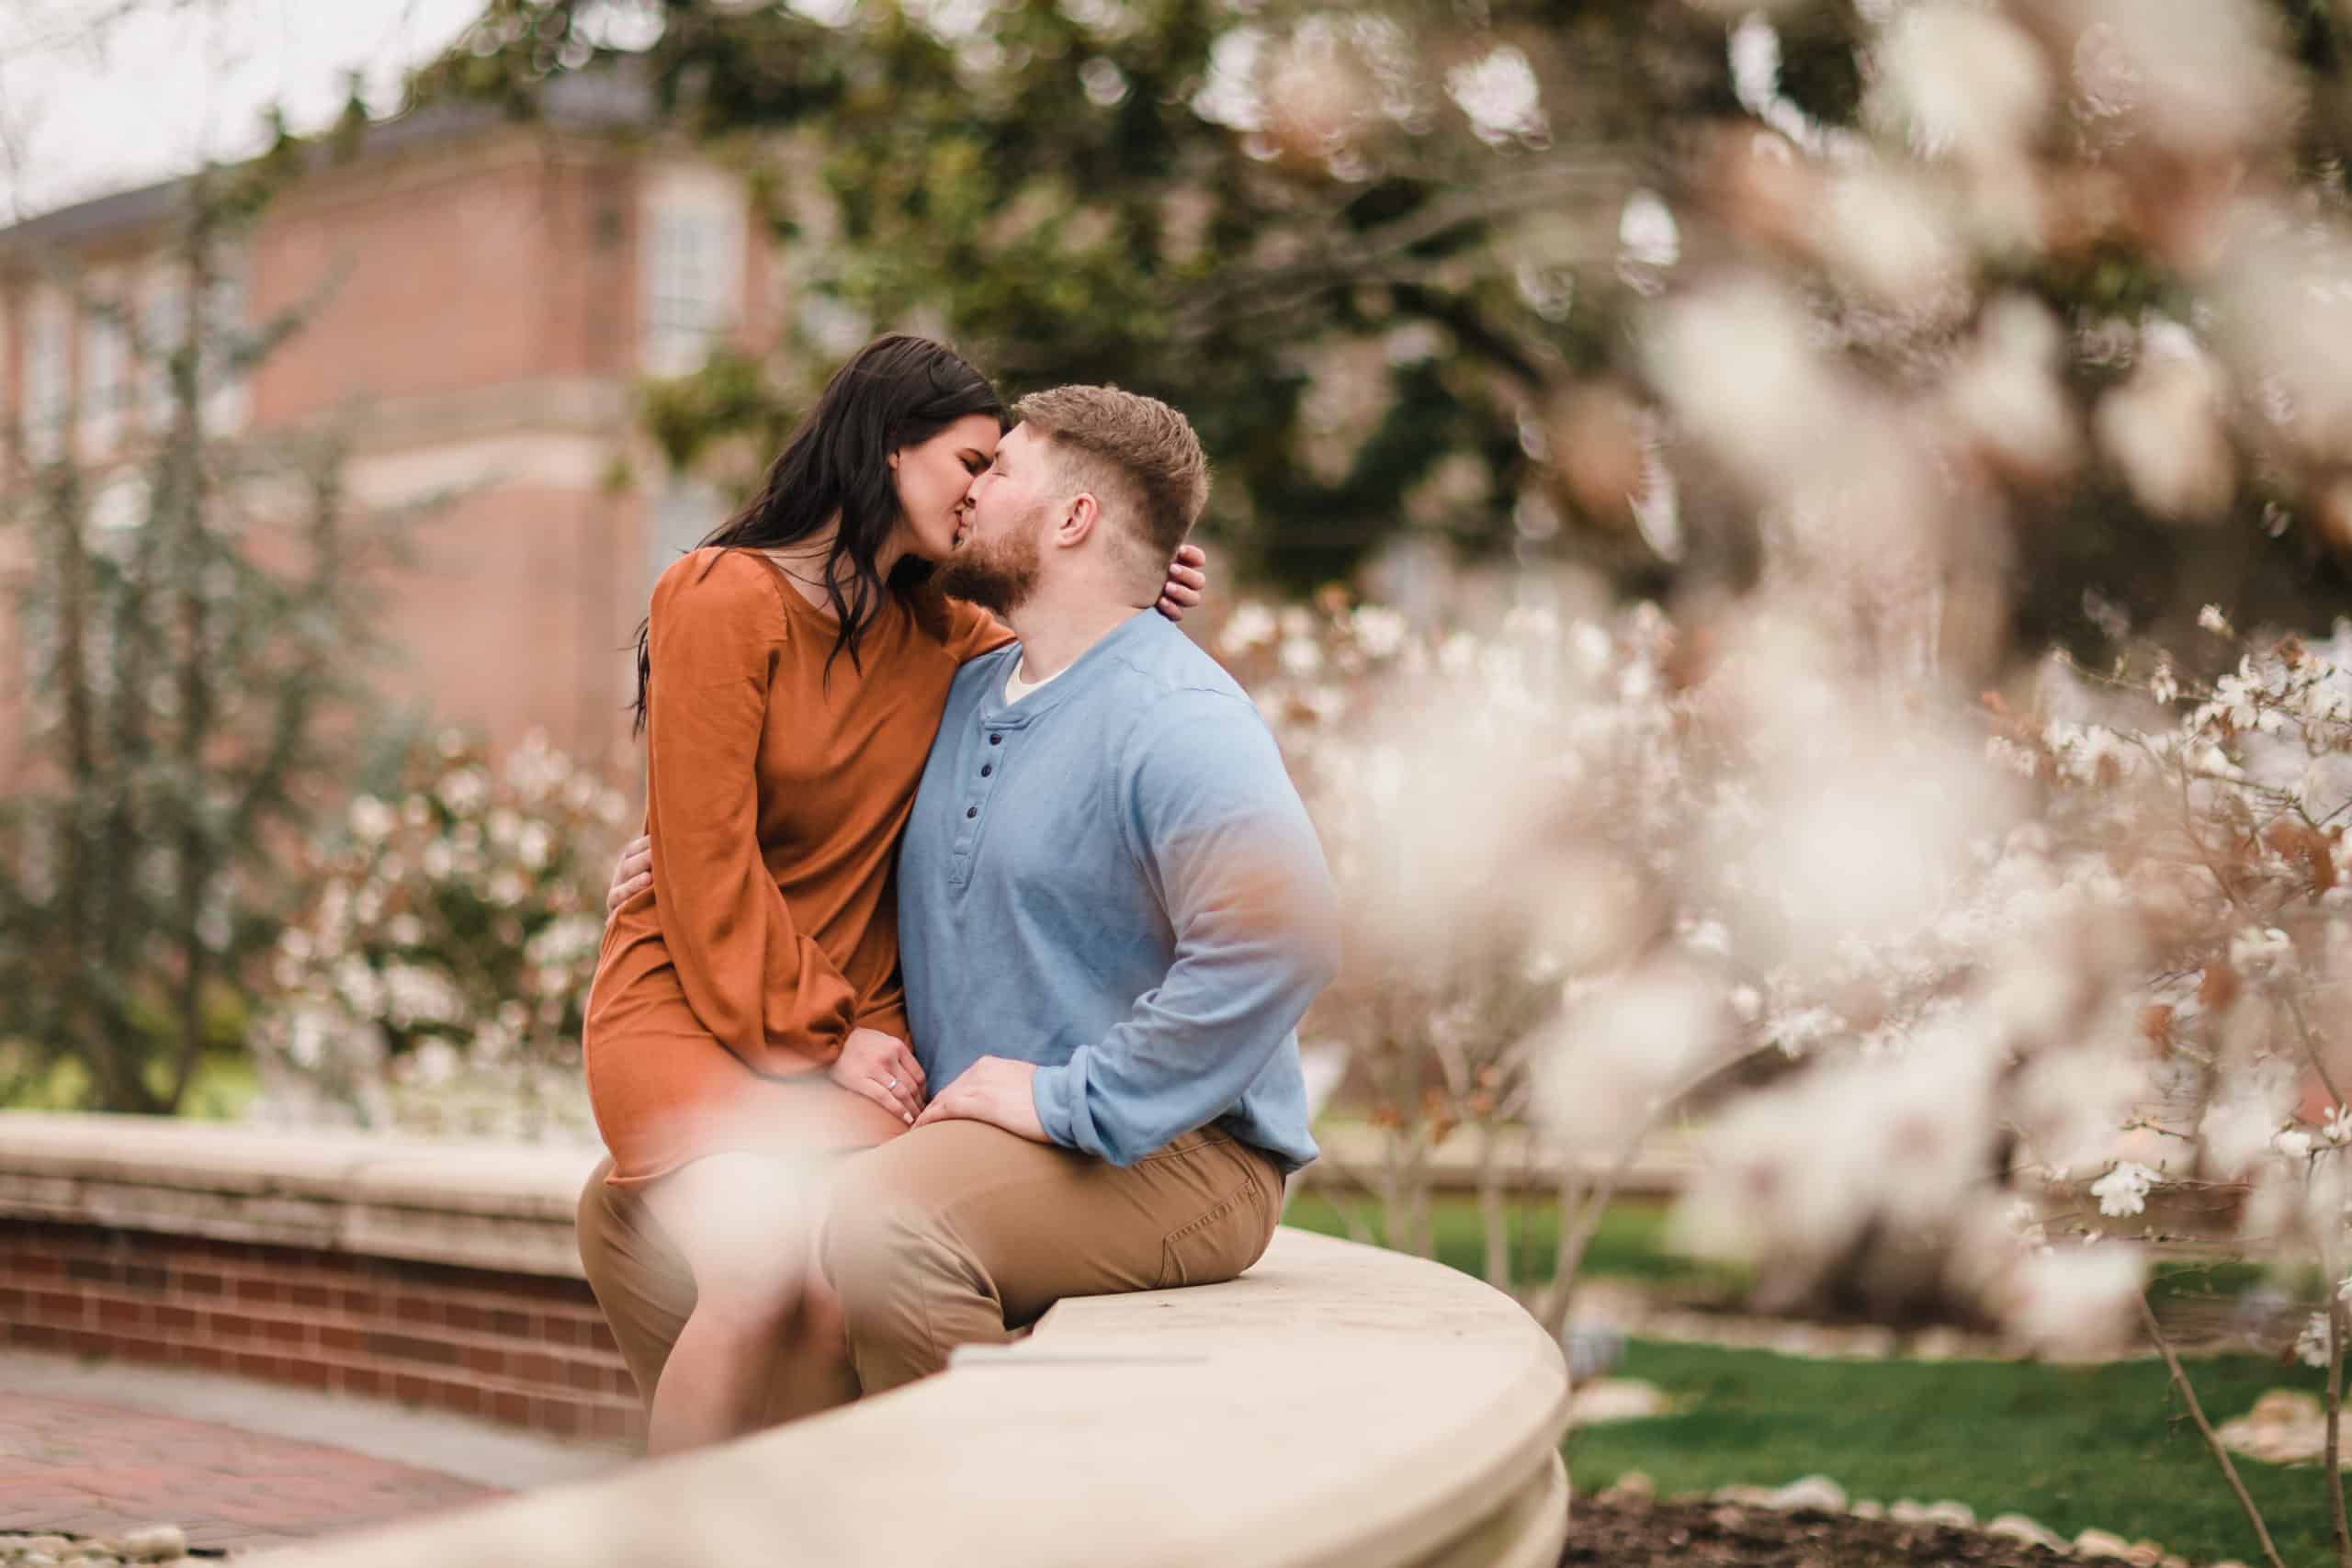 Isabel & Andrew - College Inspired Engagement Session at Tennessee Tech University